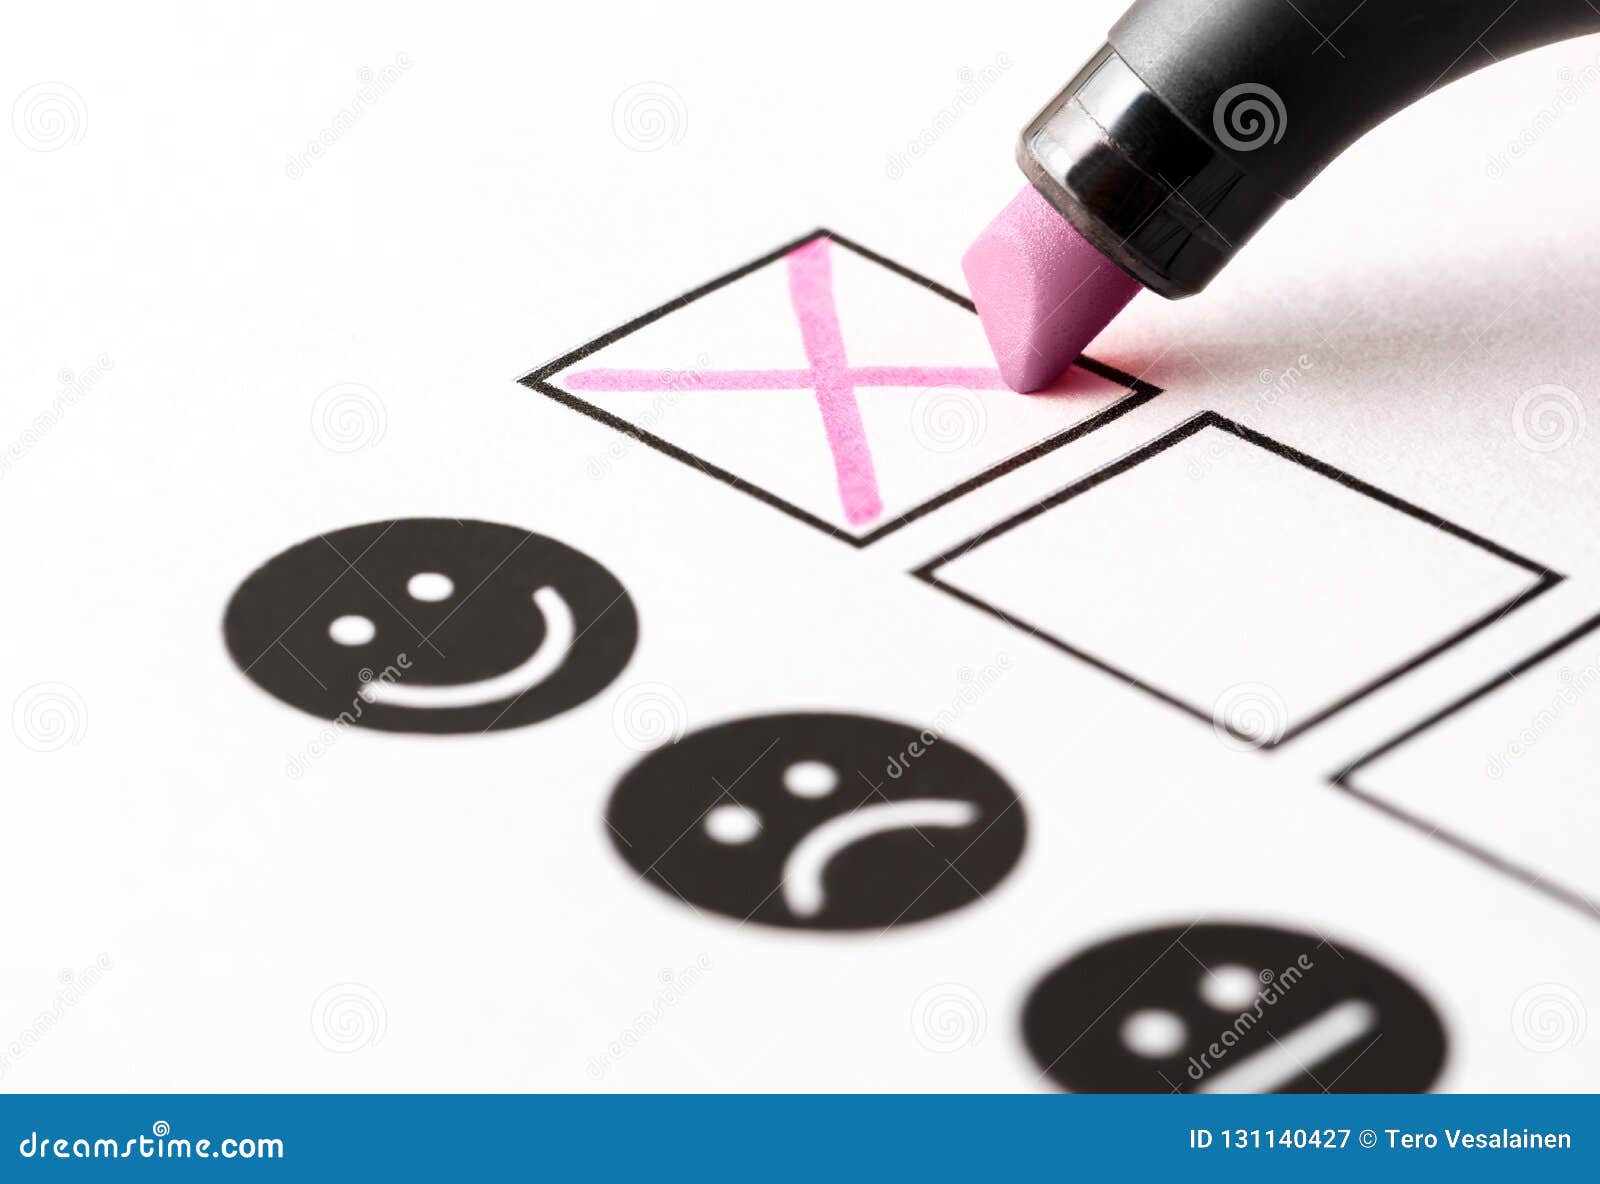 experience survey, employee feedback questionnaire or business poll concept.